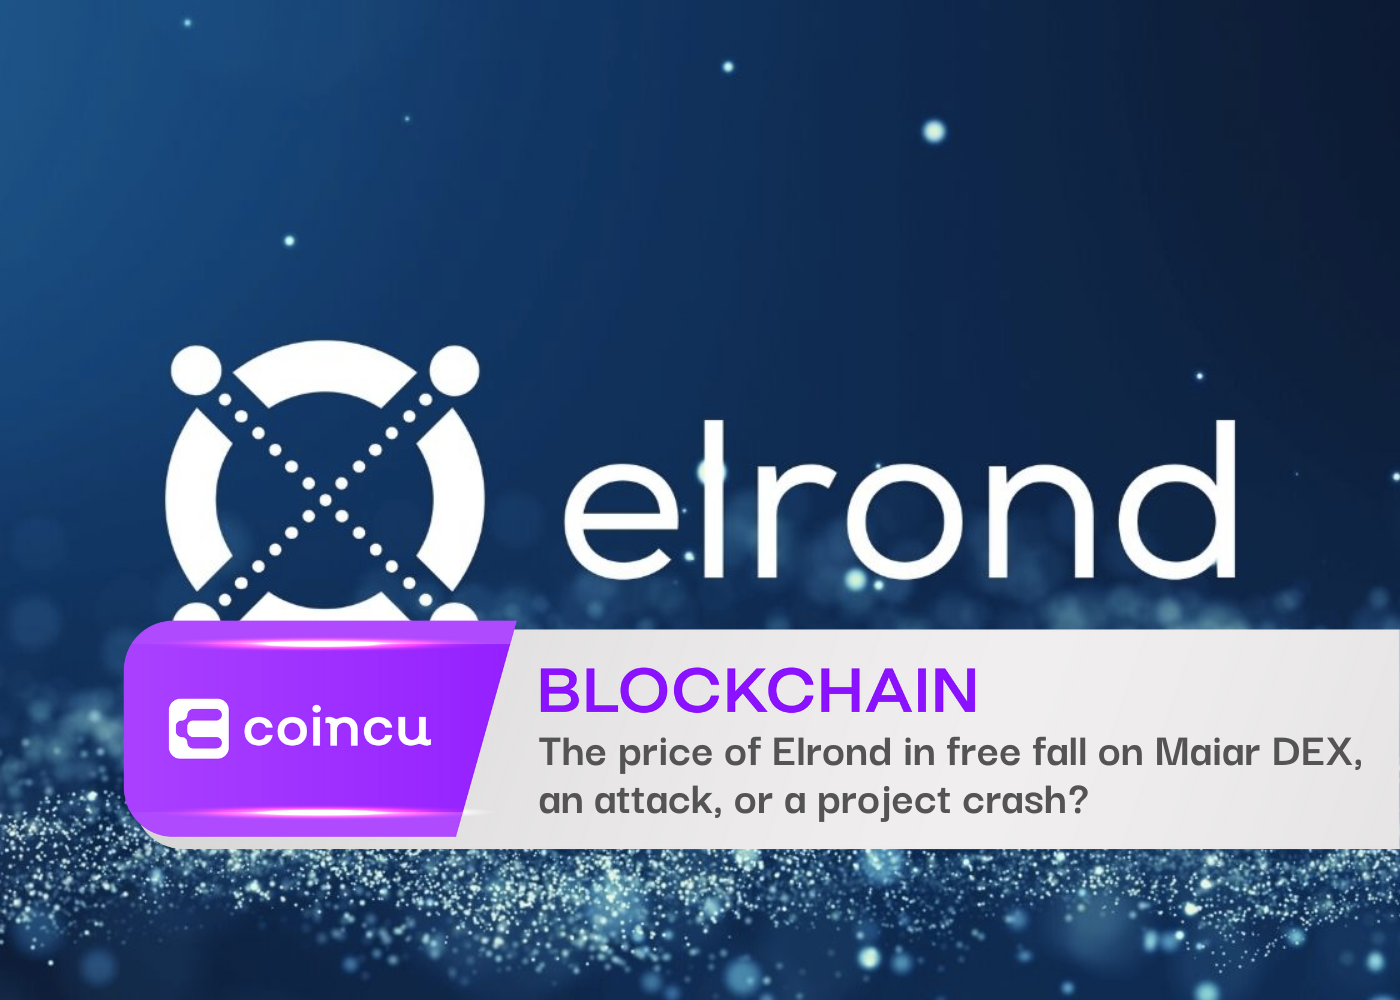 The price of Elrond in free fall on Maiar DEX, an attack, or a project crash?